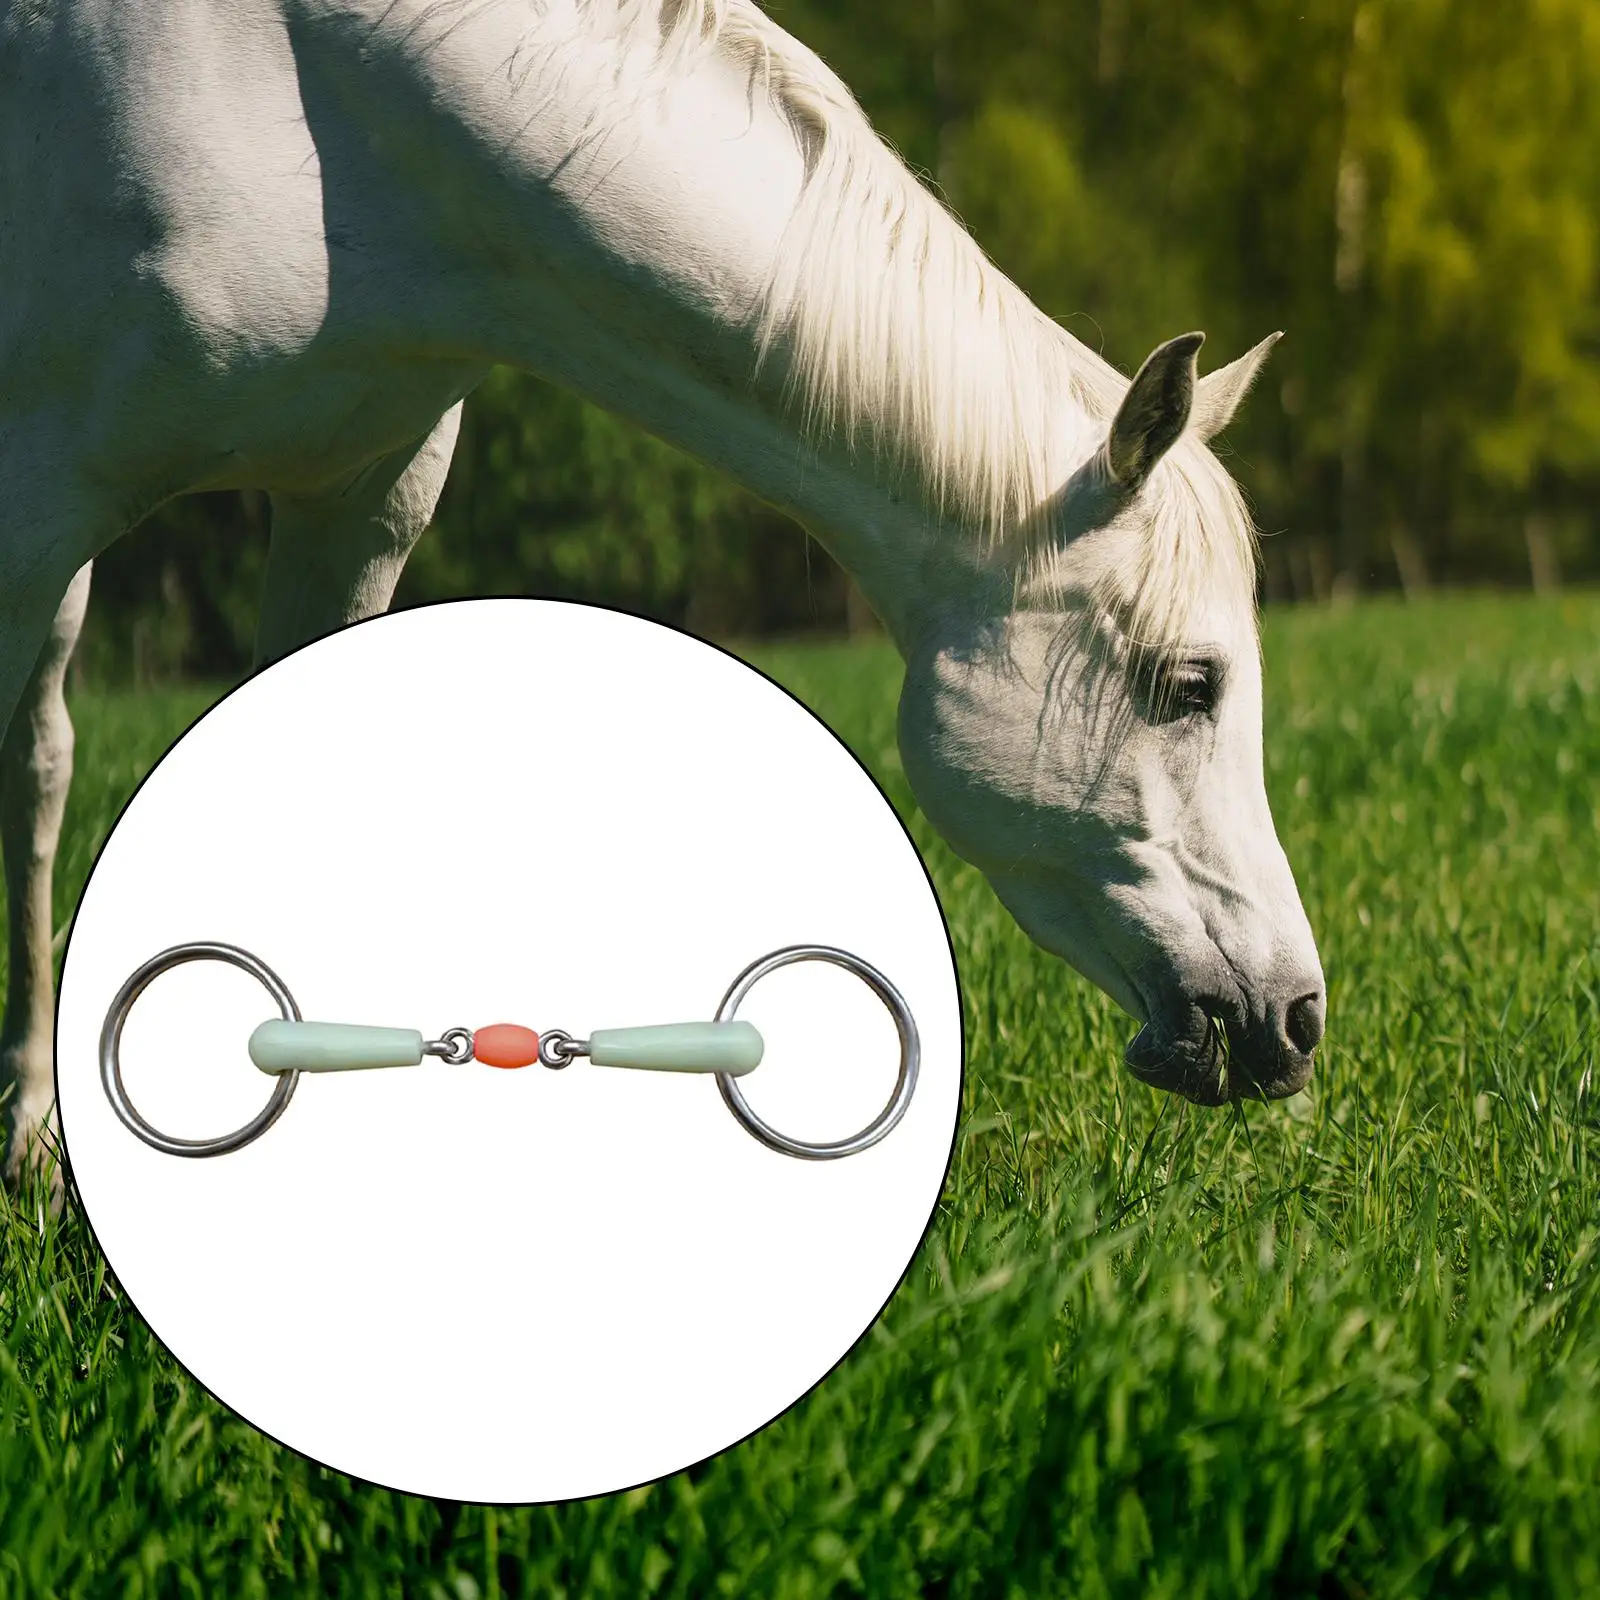 Horse Mouth Bit Round Comfort Hollow Flavor Link Supplies for Equipment Training